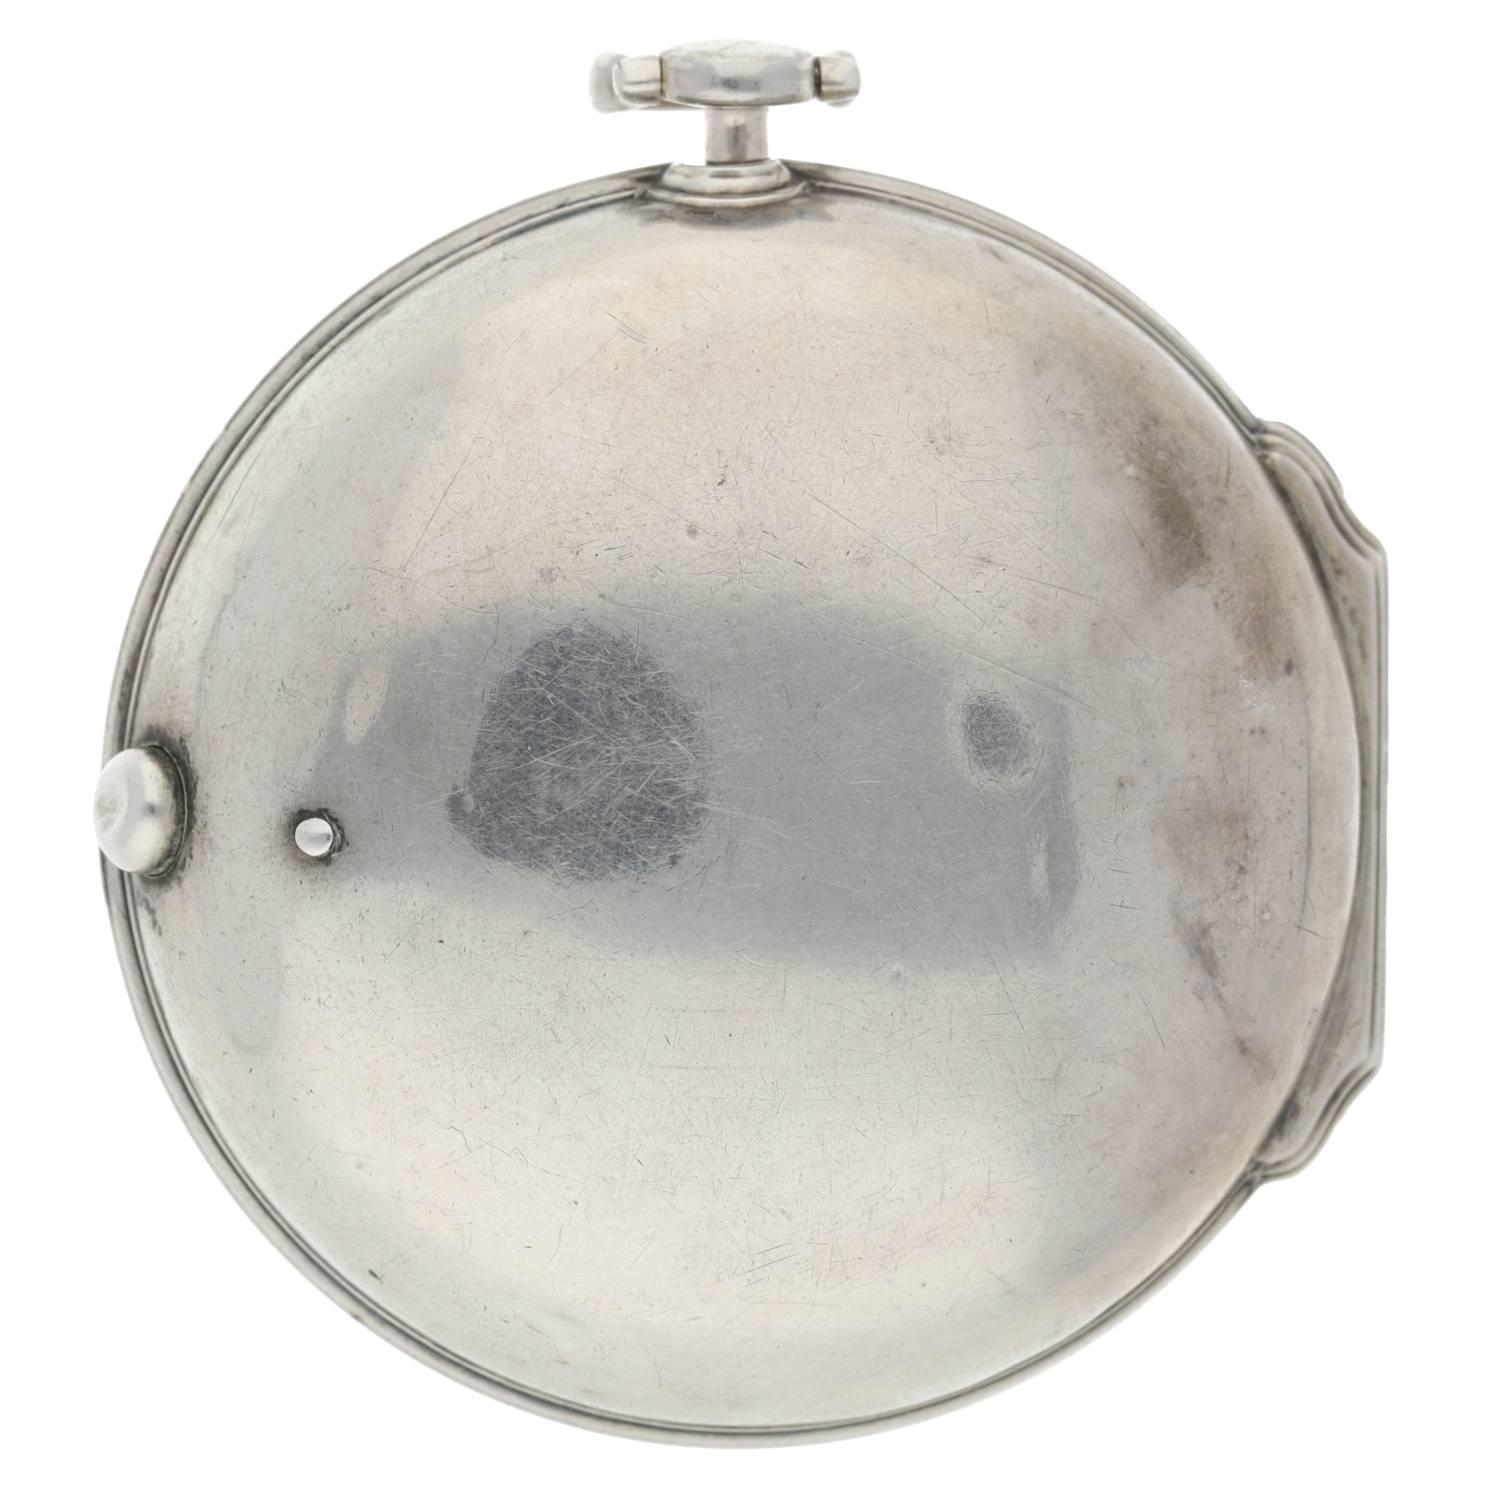 Charles Carbier, London - early 18th century English silver pair cased verge pocket watch made for - Image 9 of 11